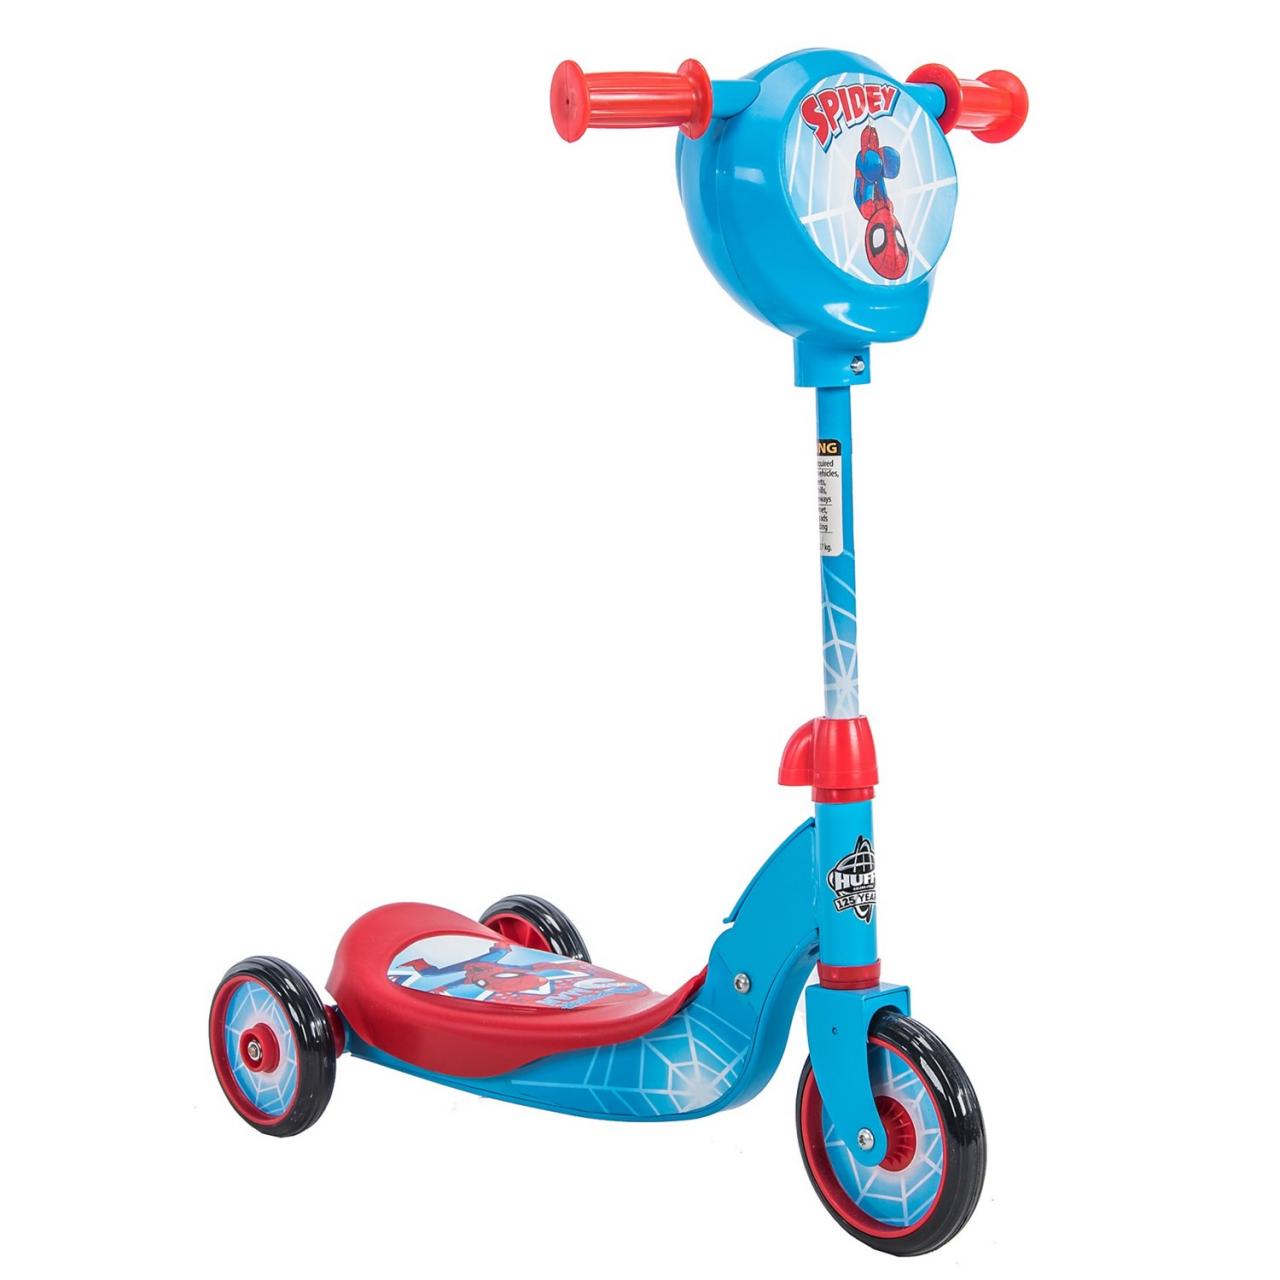 Huffy Spiderman 3Wheel Scooter